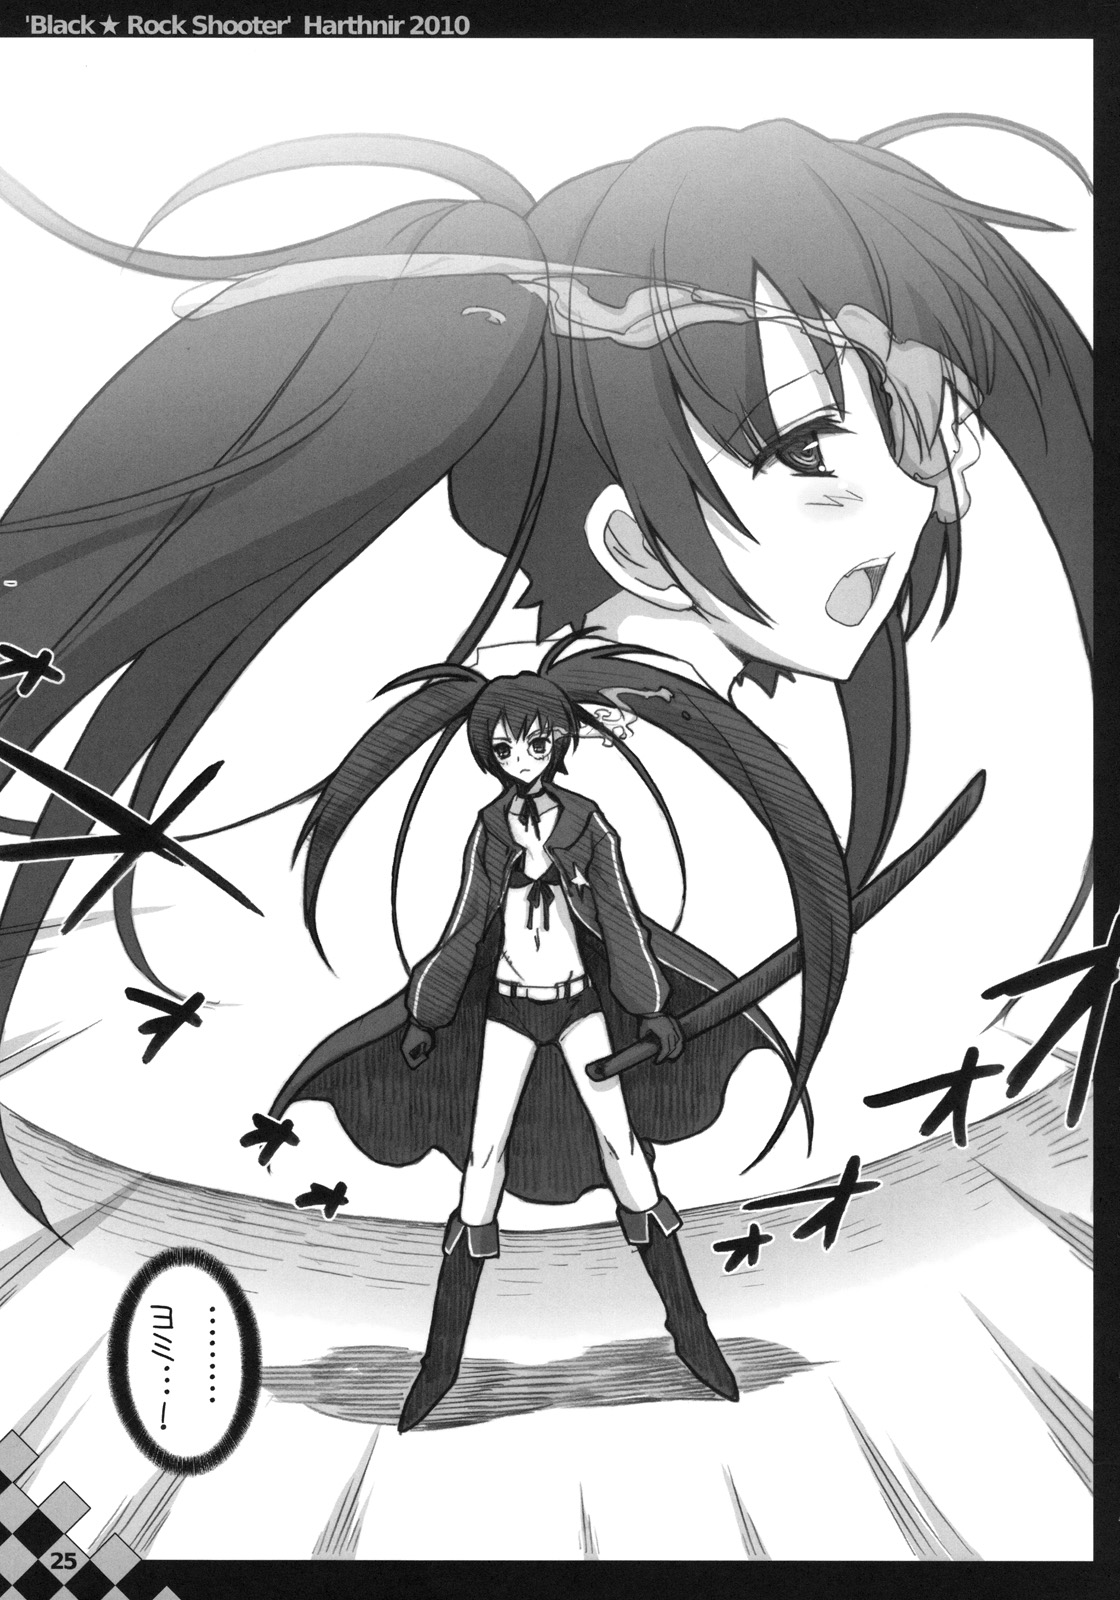 (C78) (同人誌) [ハースニール (みさくらなんこつ)] Out of Bounds. (BLACK★ROCK SHOOTER)